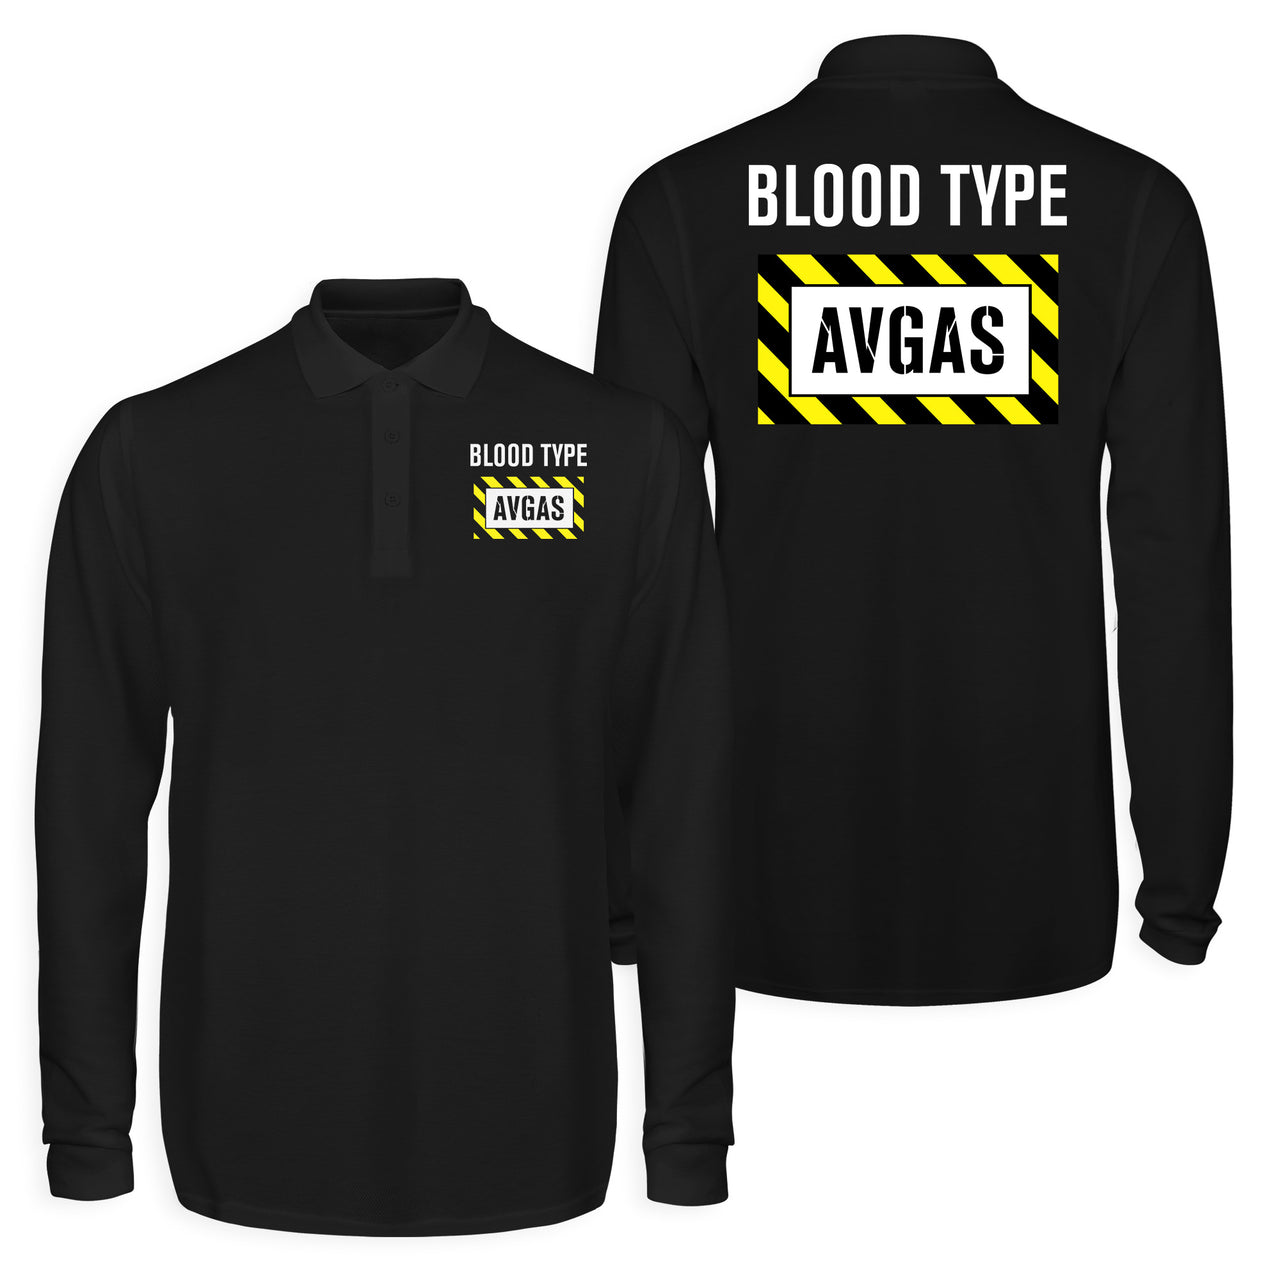 Blood Type AVGAS Designed Long Sleeve Polo T-Shirts (Double-Side)